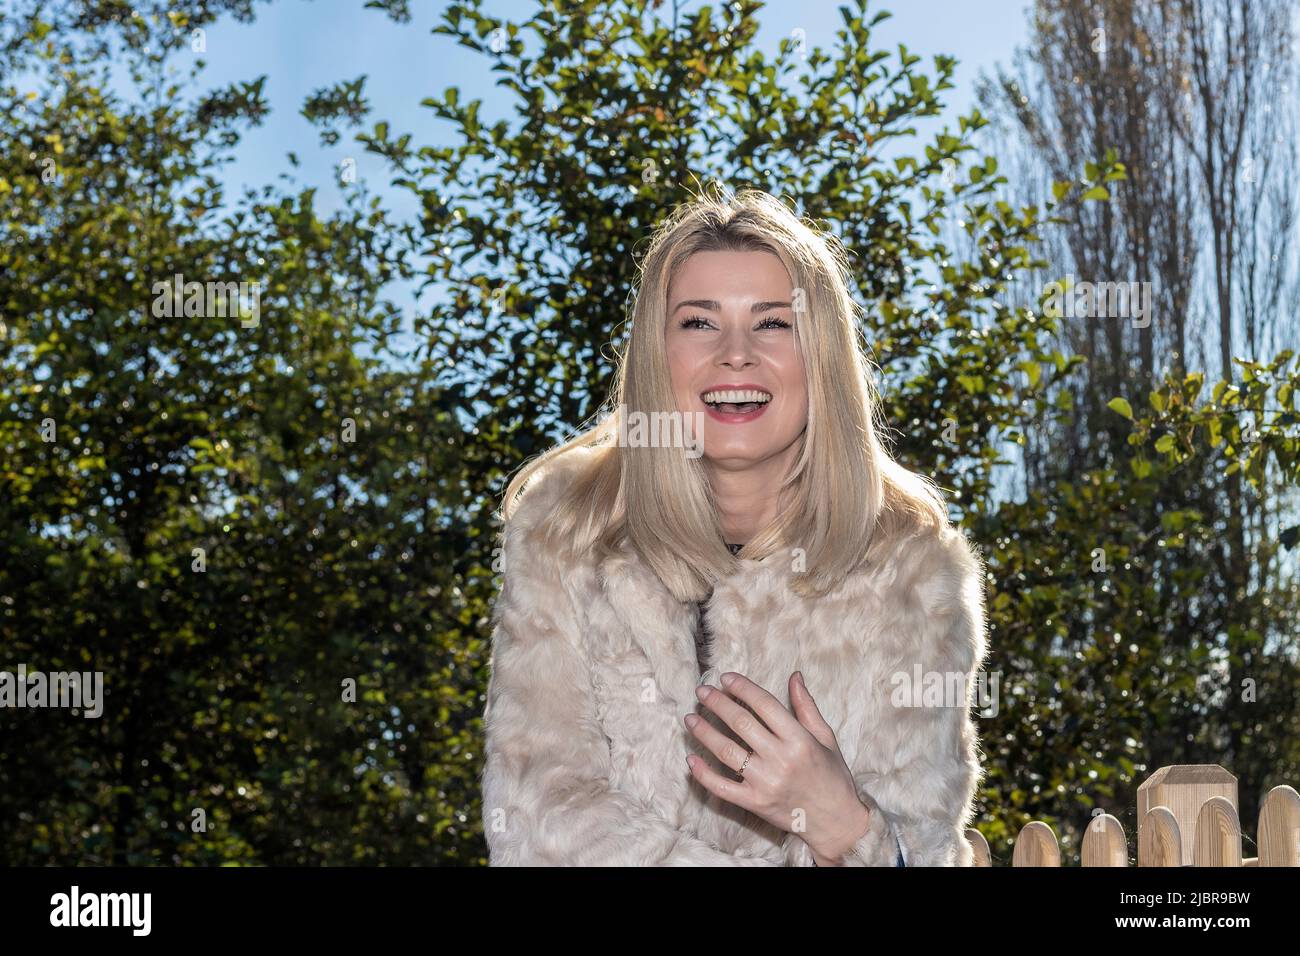 beautiful blonde woman laughing joyfully in a park on a sunny winter day Stock Photo